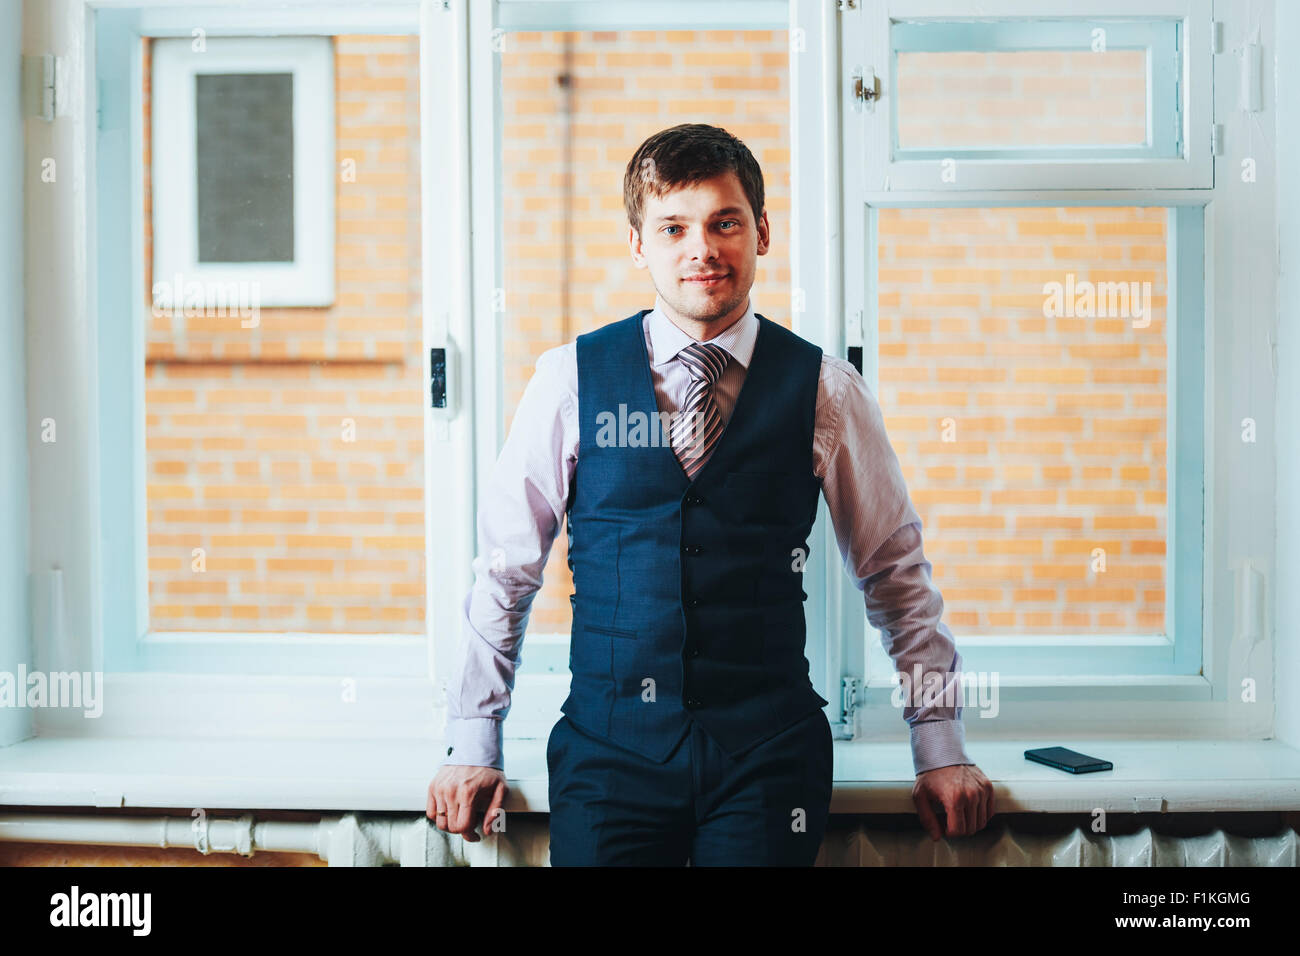 Handsome Caucasian Man In Business Attire Staying In Room Near Window Stock Photo